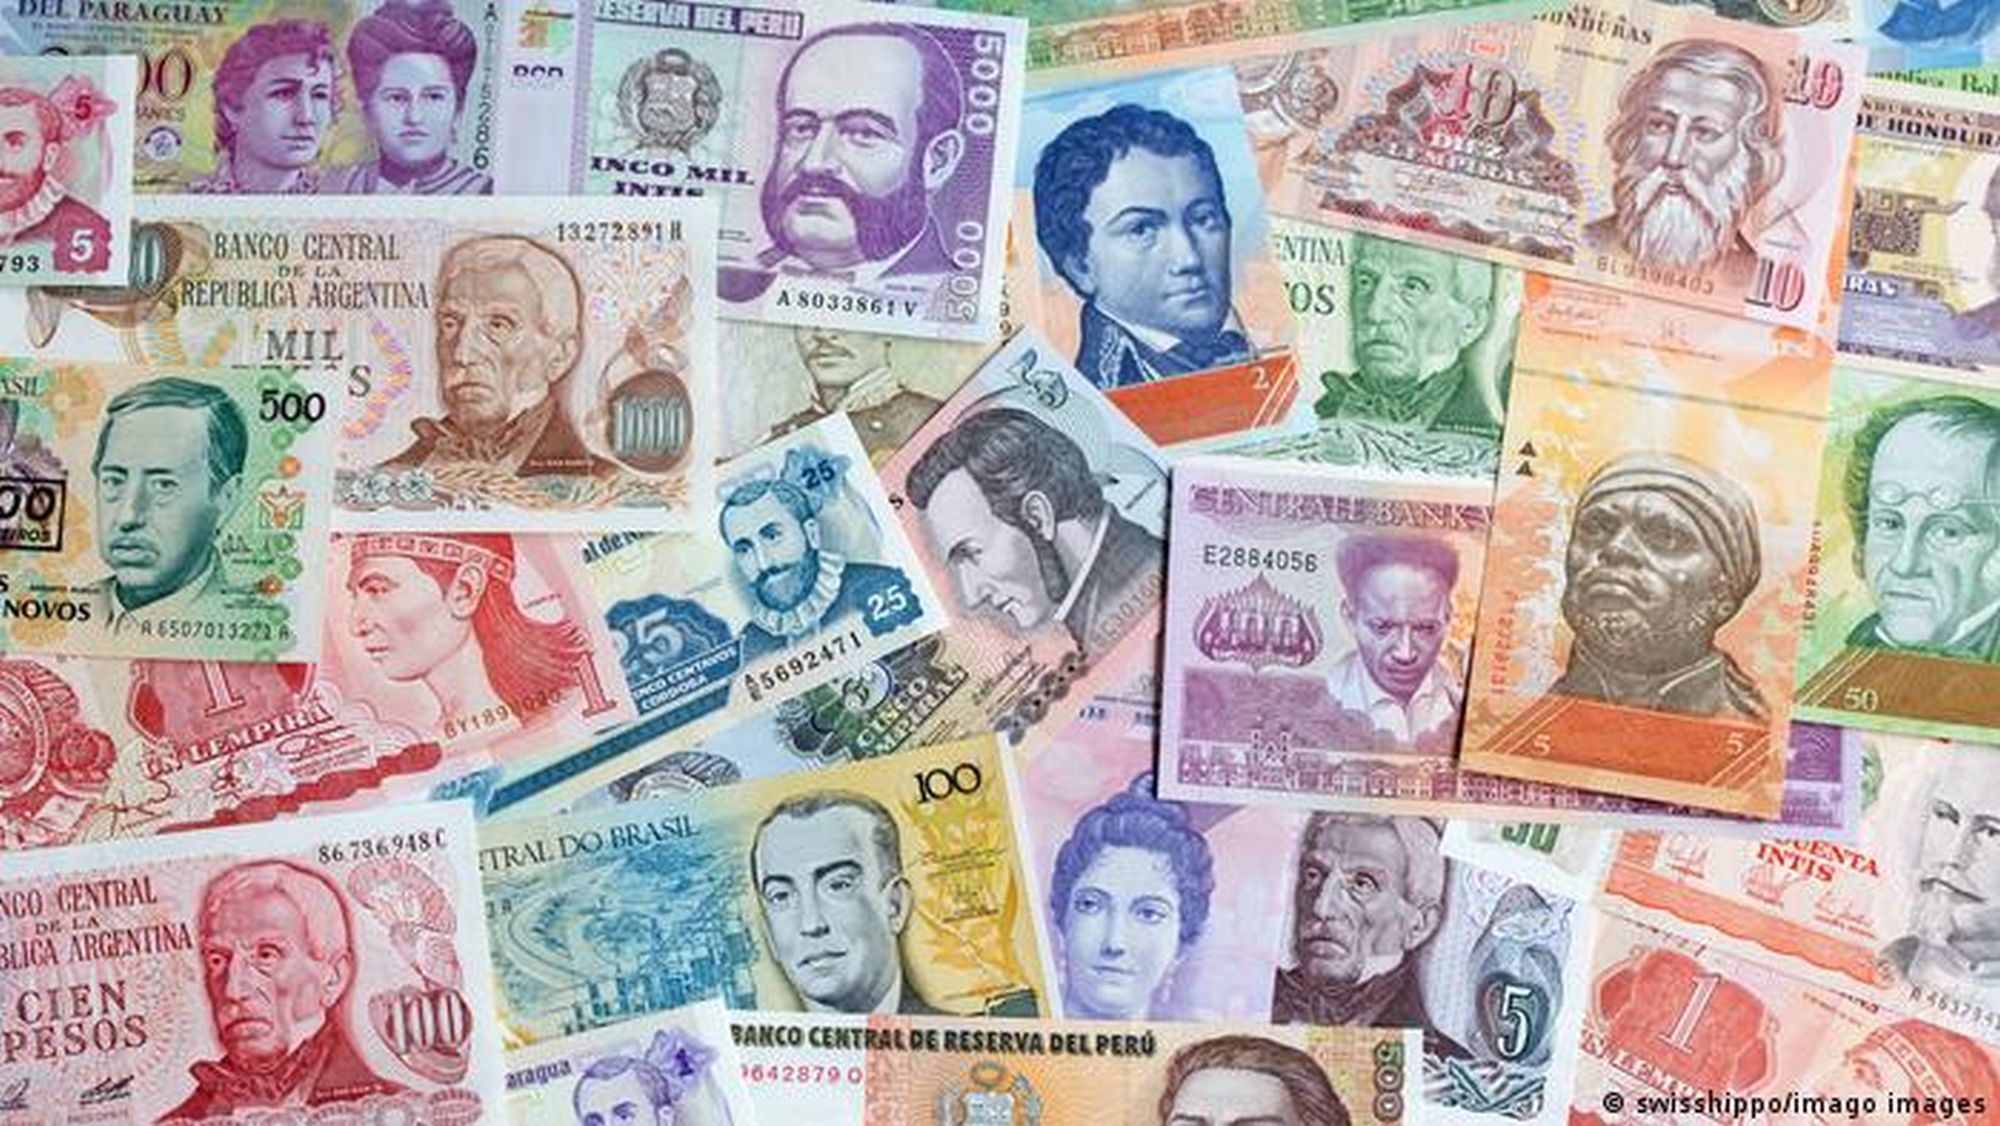 Could all these Latin American banknotes make way for a single currency in the region?